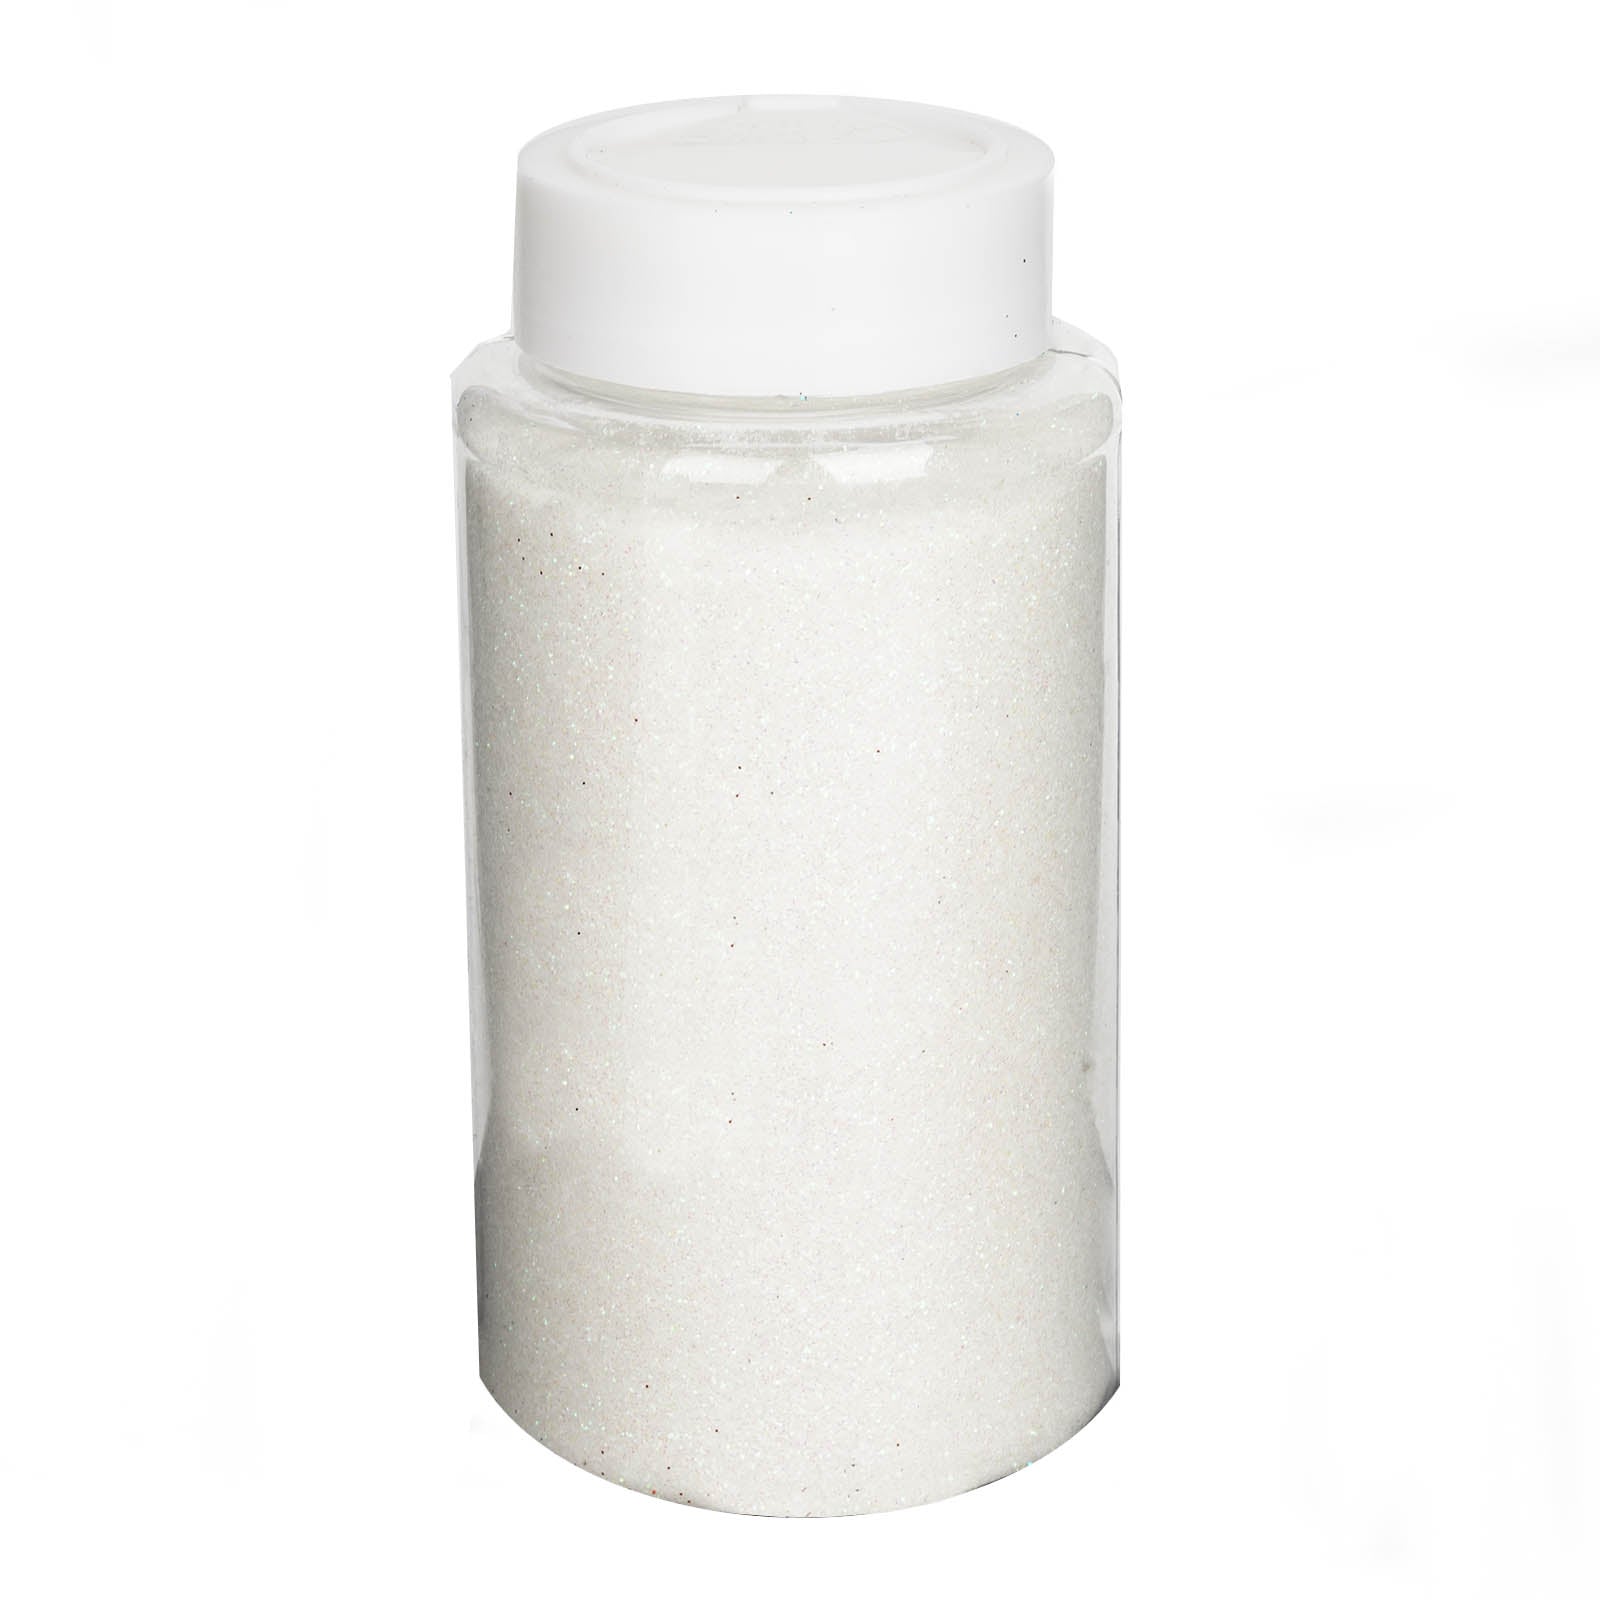 Efavormart 1 Pound White DIY Art & Craft Glitter Extra Fine with Shaker Bottle for Wedding Party Event Table Centerpieces